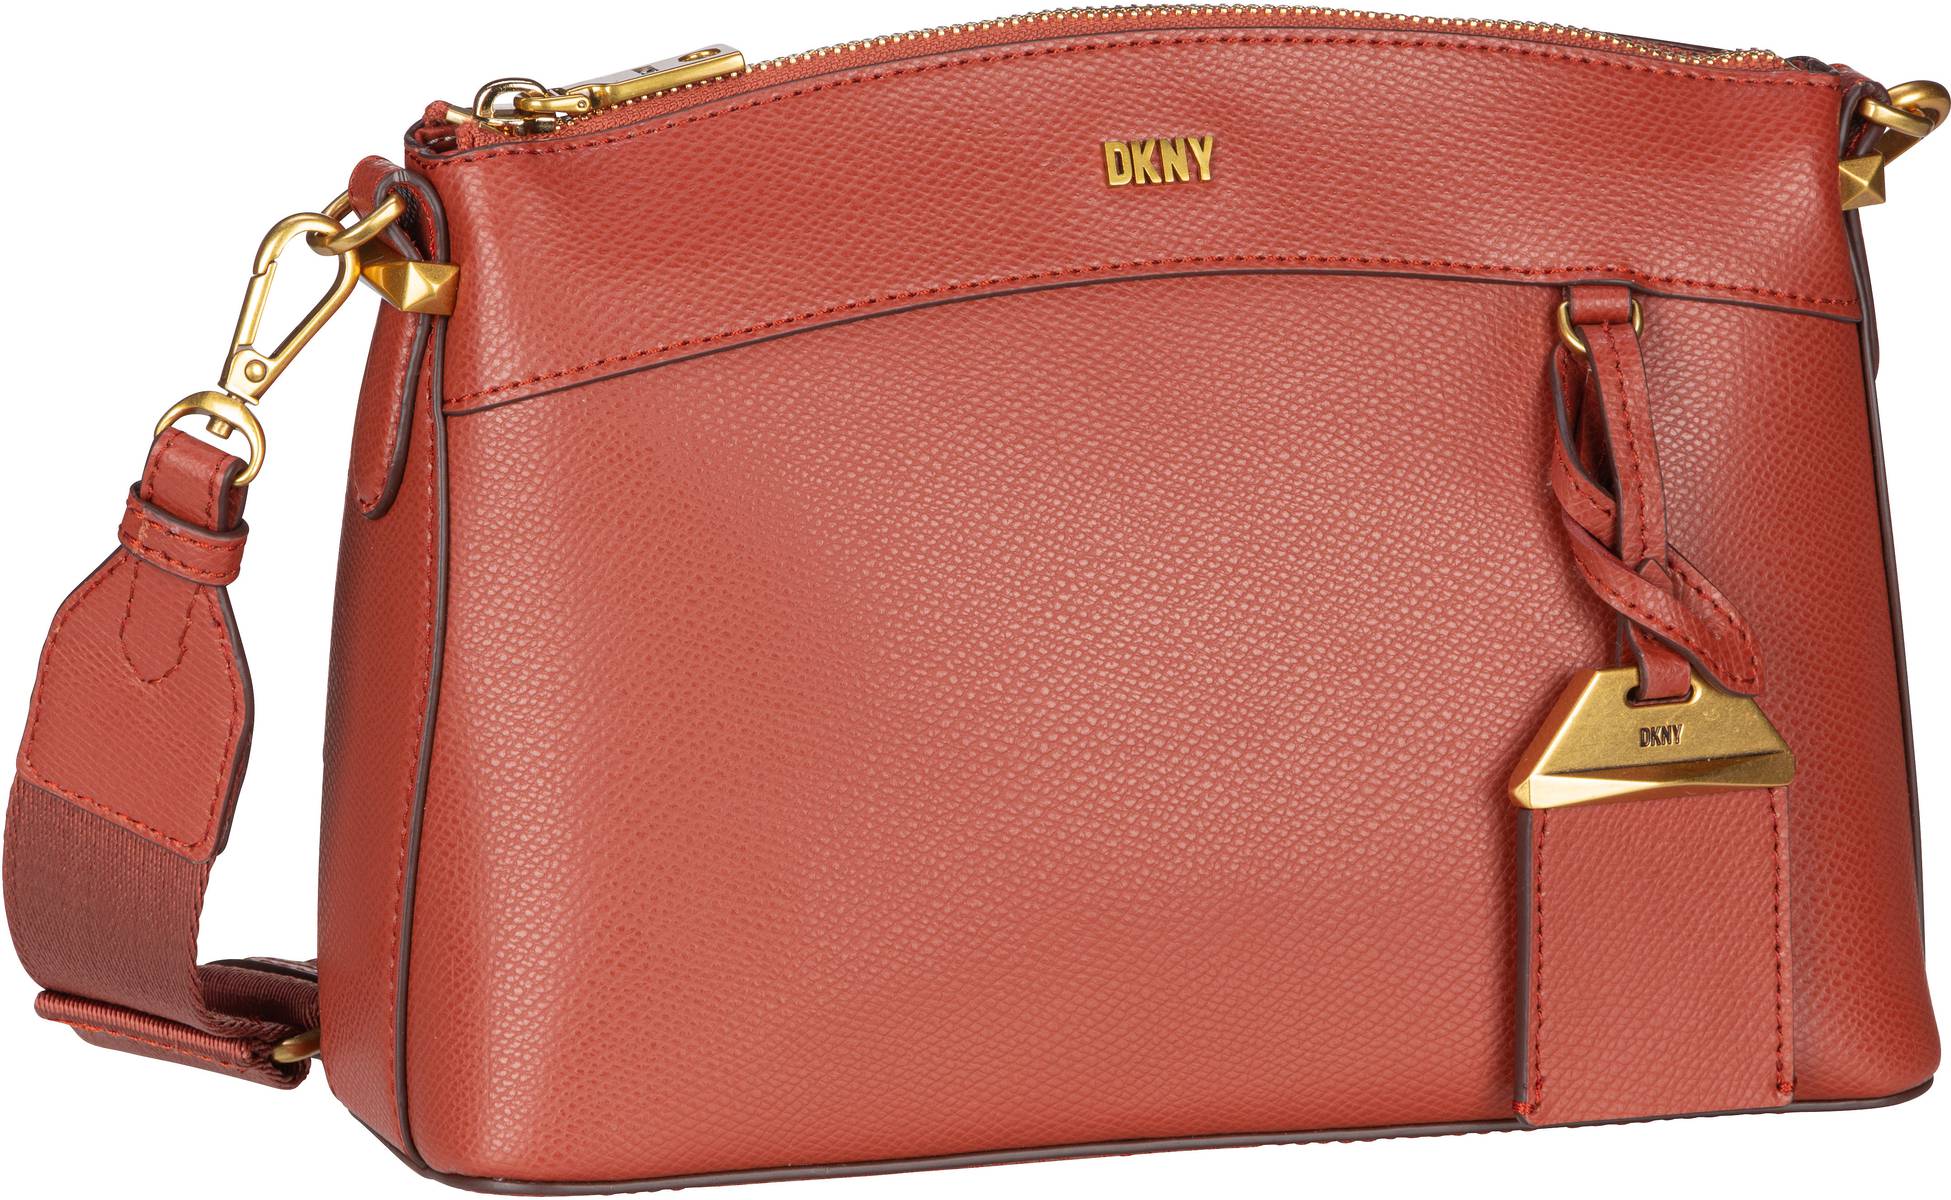 DKNY Marykate Dundee Leather Crossbody - Brick Red